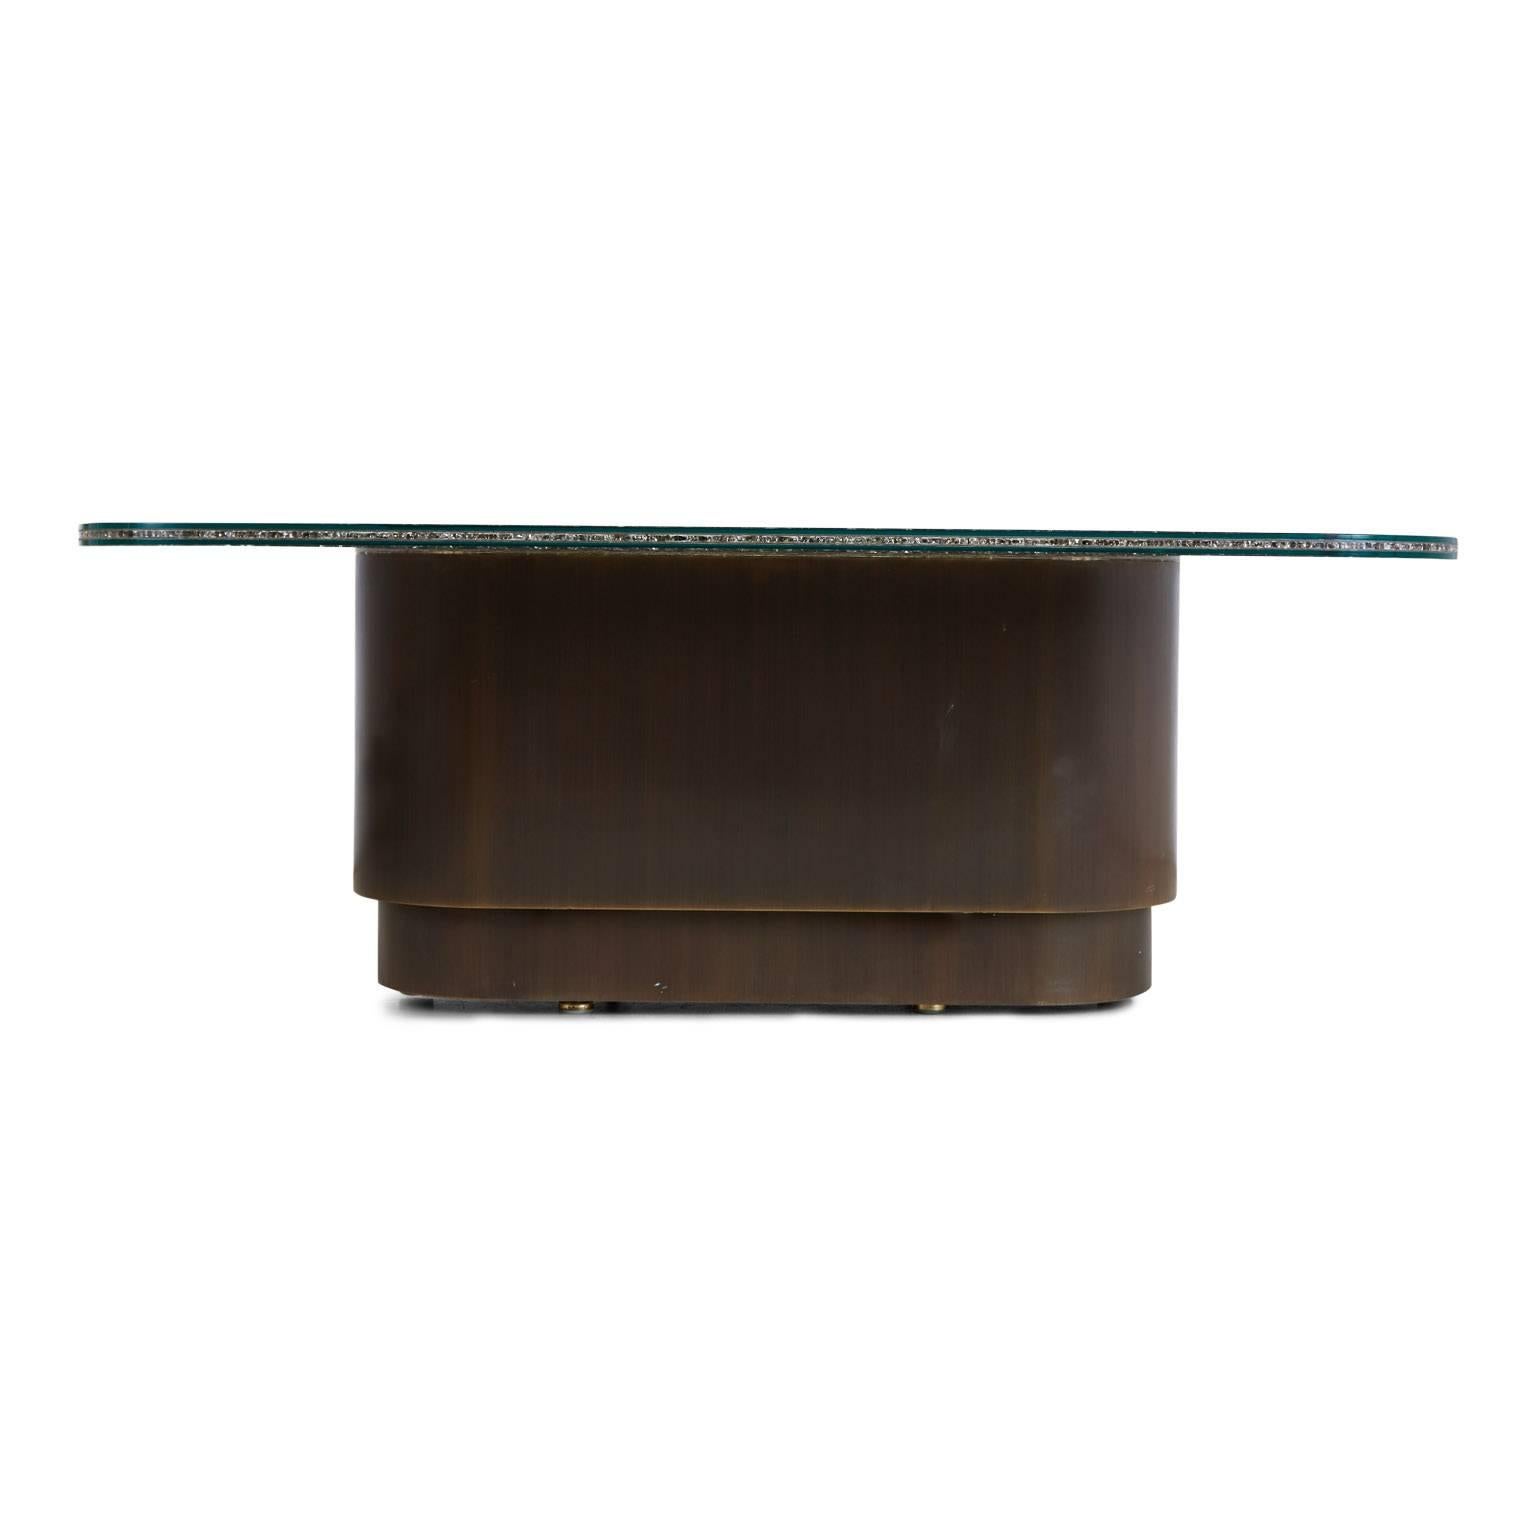 Inject some some relaxed, quirky Palm Springs style in to your space with this slick coffee or cocktail table created by iconic designer and Palm Springs resident Steve Chase. This piece embodies Chase's signature design aesthetic, as described in